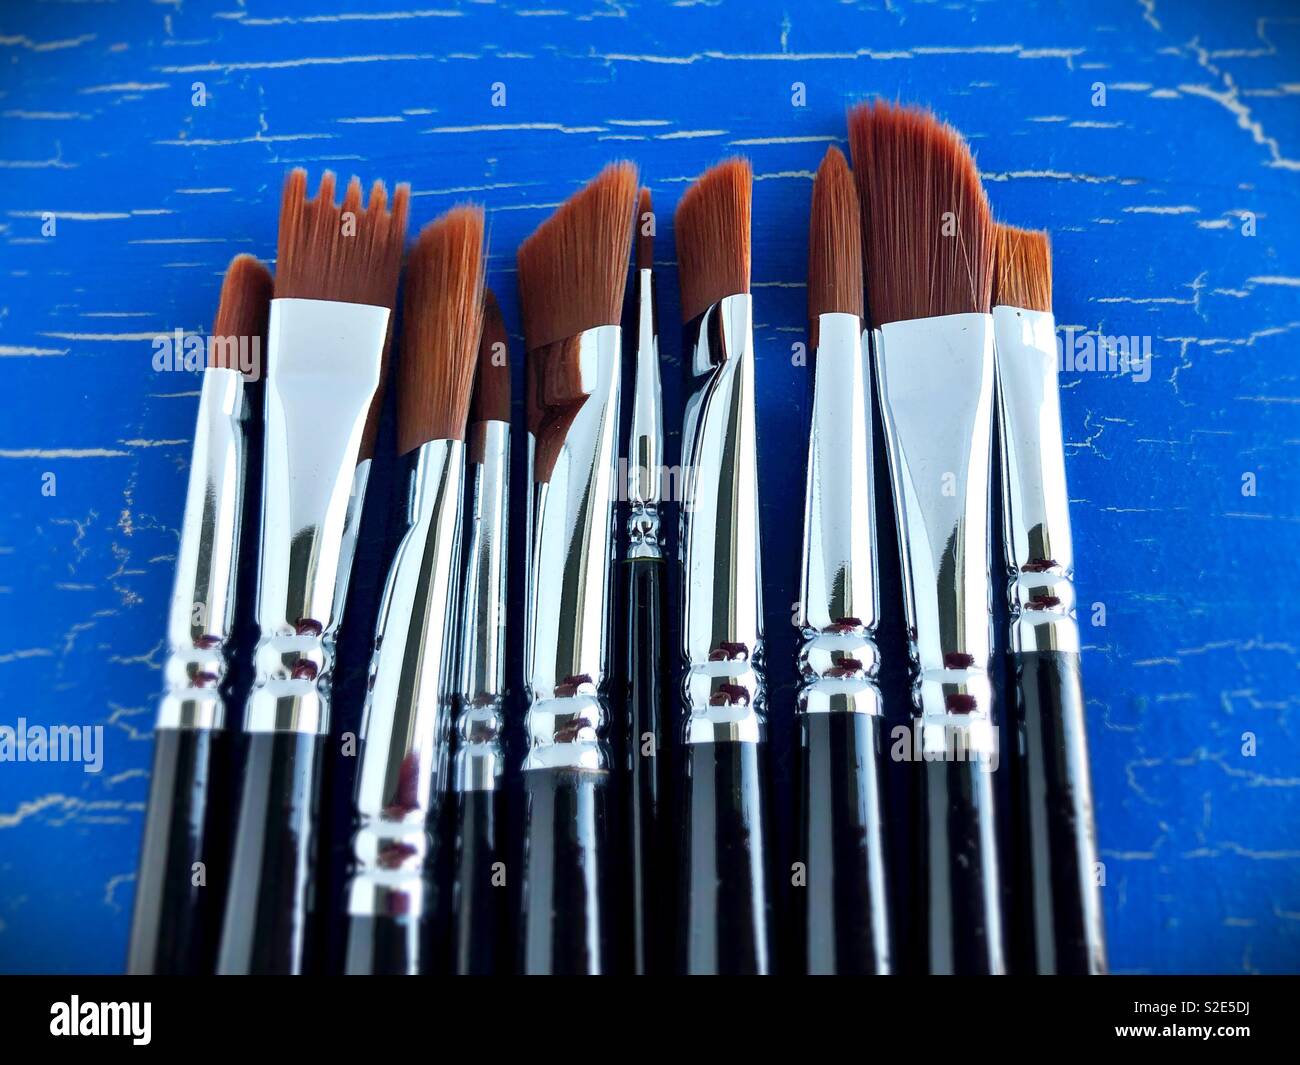 A variety of paintbrushes. Stock Photo